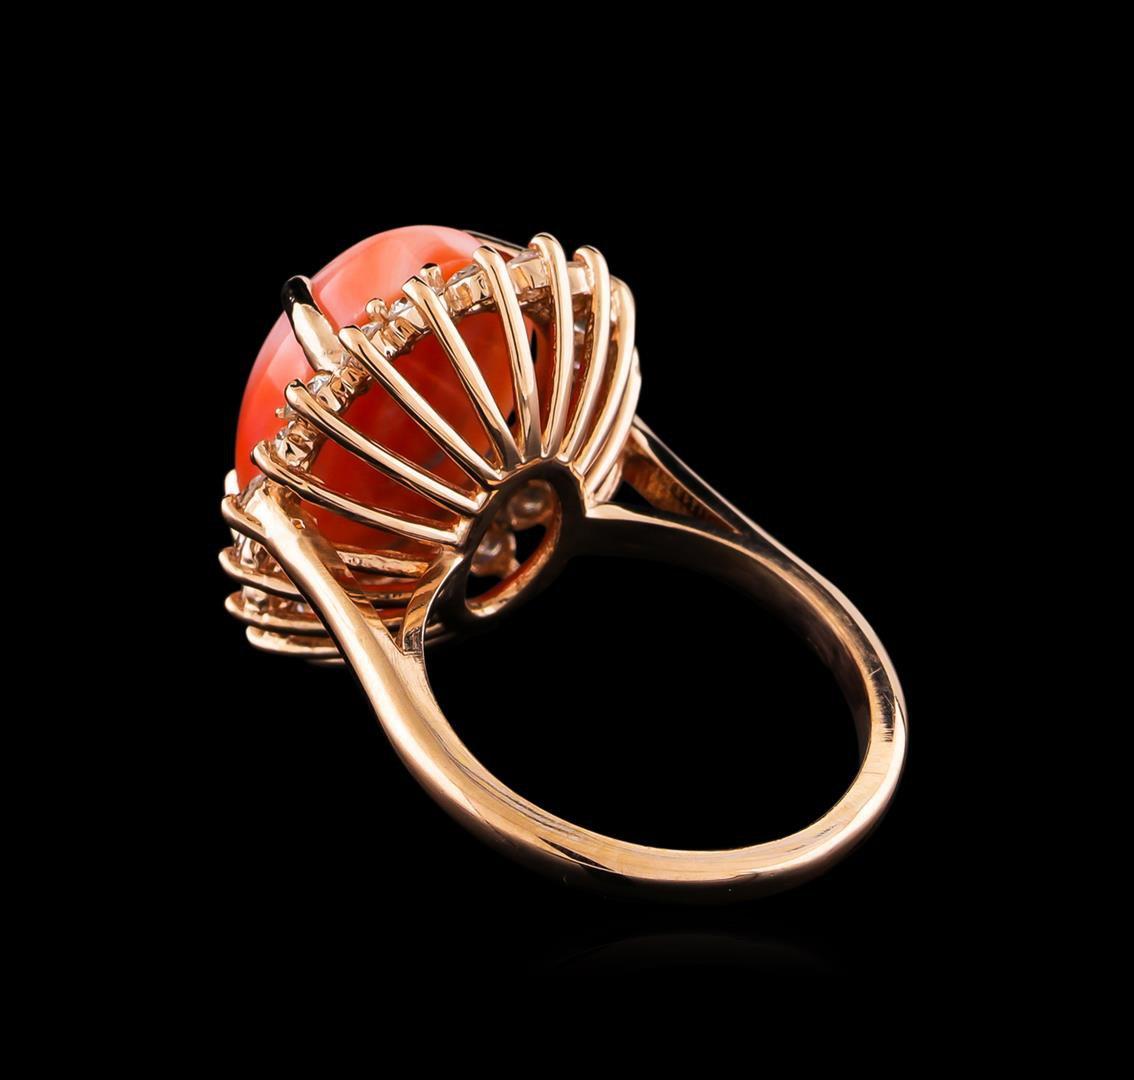 7.06 ctw Coral and Diamond Ring - 14KT Rose Gold